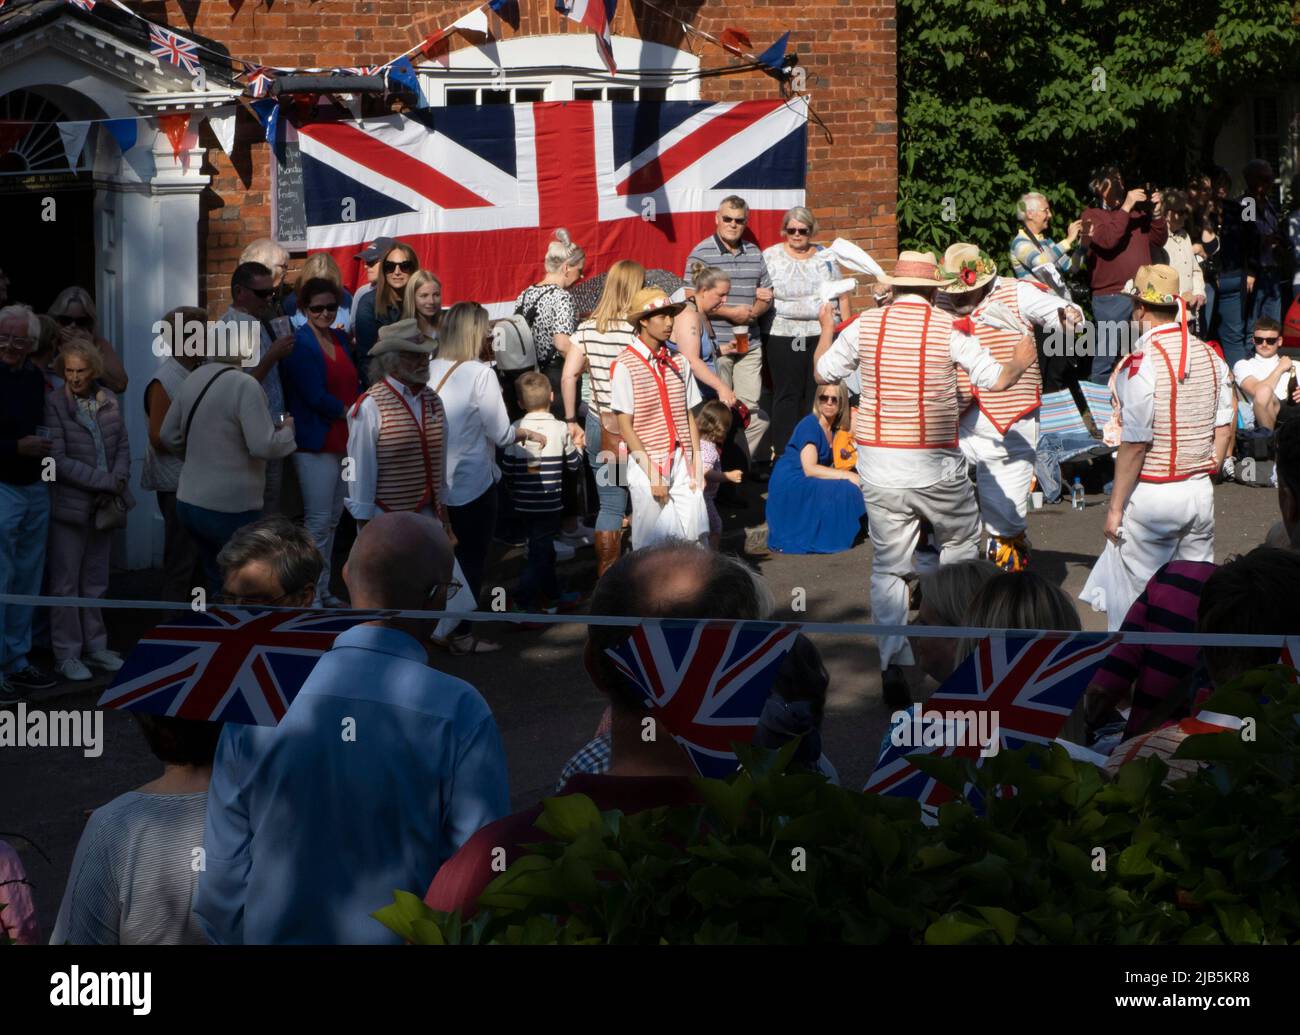 Steeple Bumpstead, Essex. 3rd June 2022. Morris Dancers from Thaxted perform outside The Red Lion public house in the quaint Essex village of Steeple Bumpstead as Jubilee celebrations continue. Credit: Jason Mitchell/Alamy Live News. Stock Photo